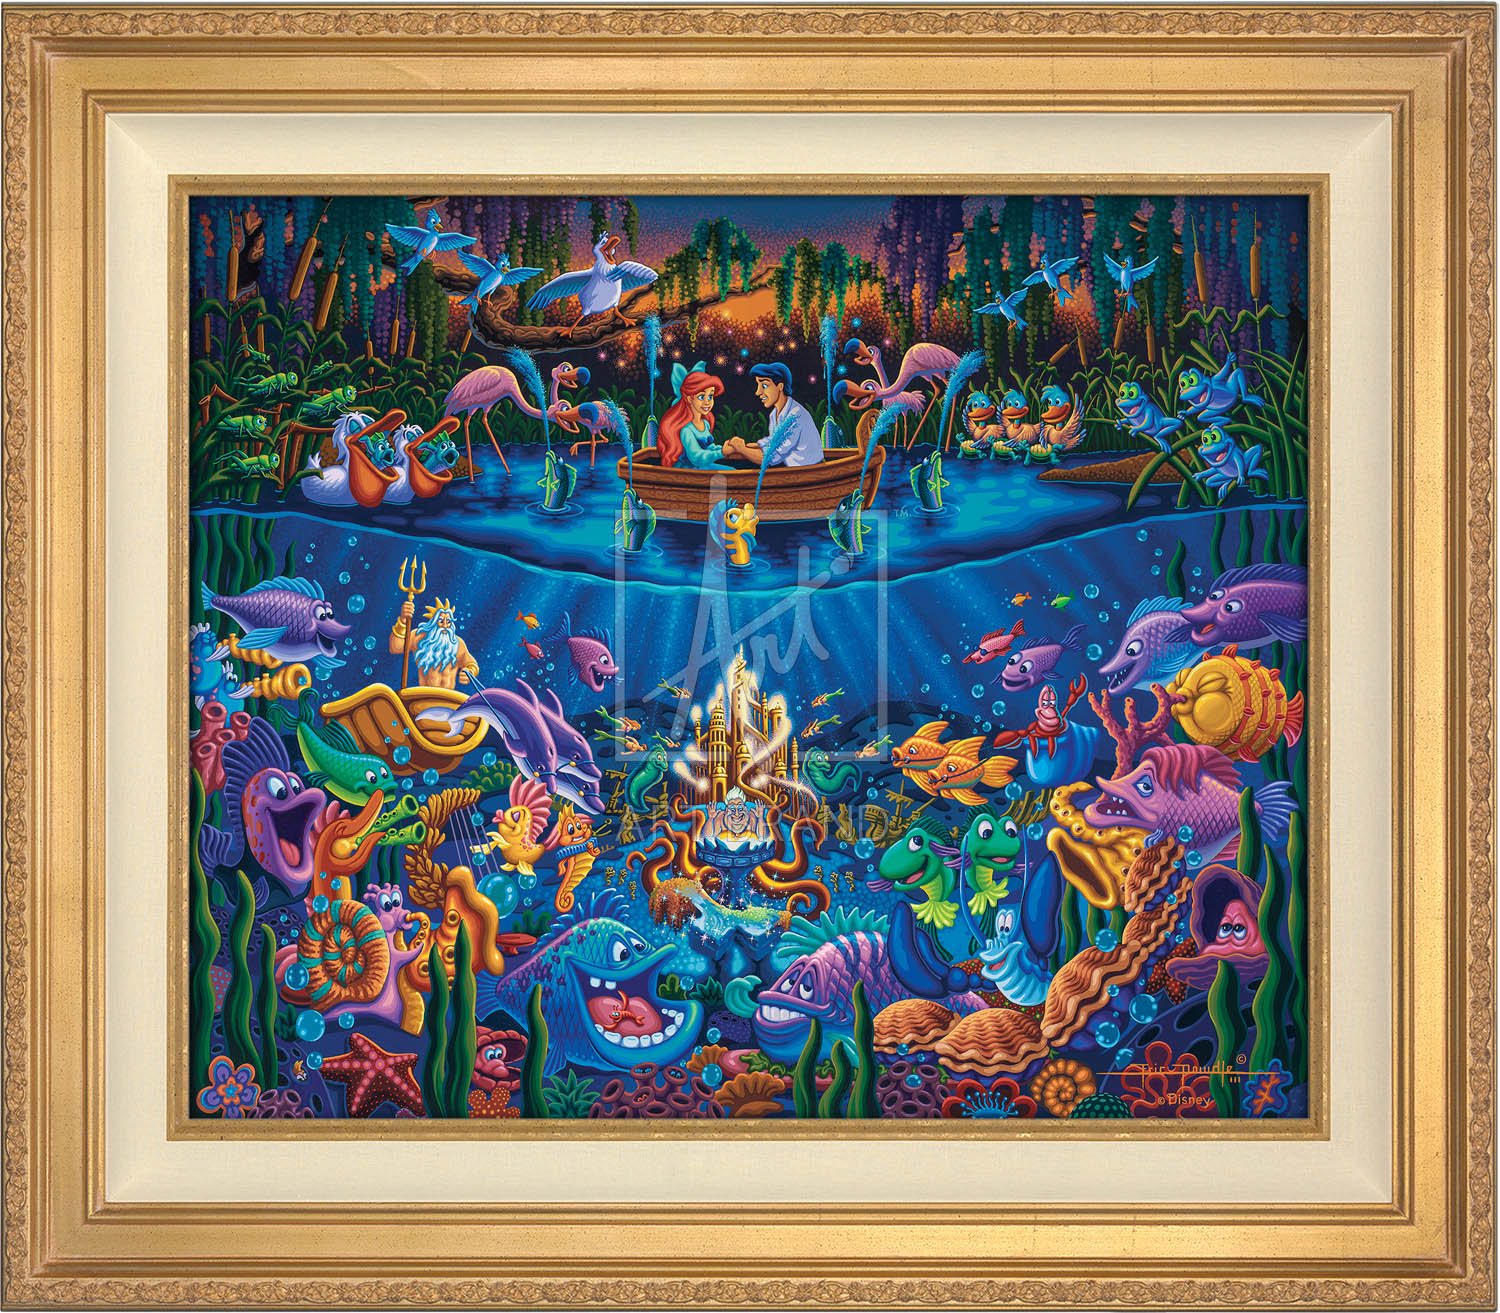 Ariel’s closest friend and confidante, Flounder, adds to the ambiance as he and six friends create a makeshift fountain around Eric’s boat - Antique Gold Frame.